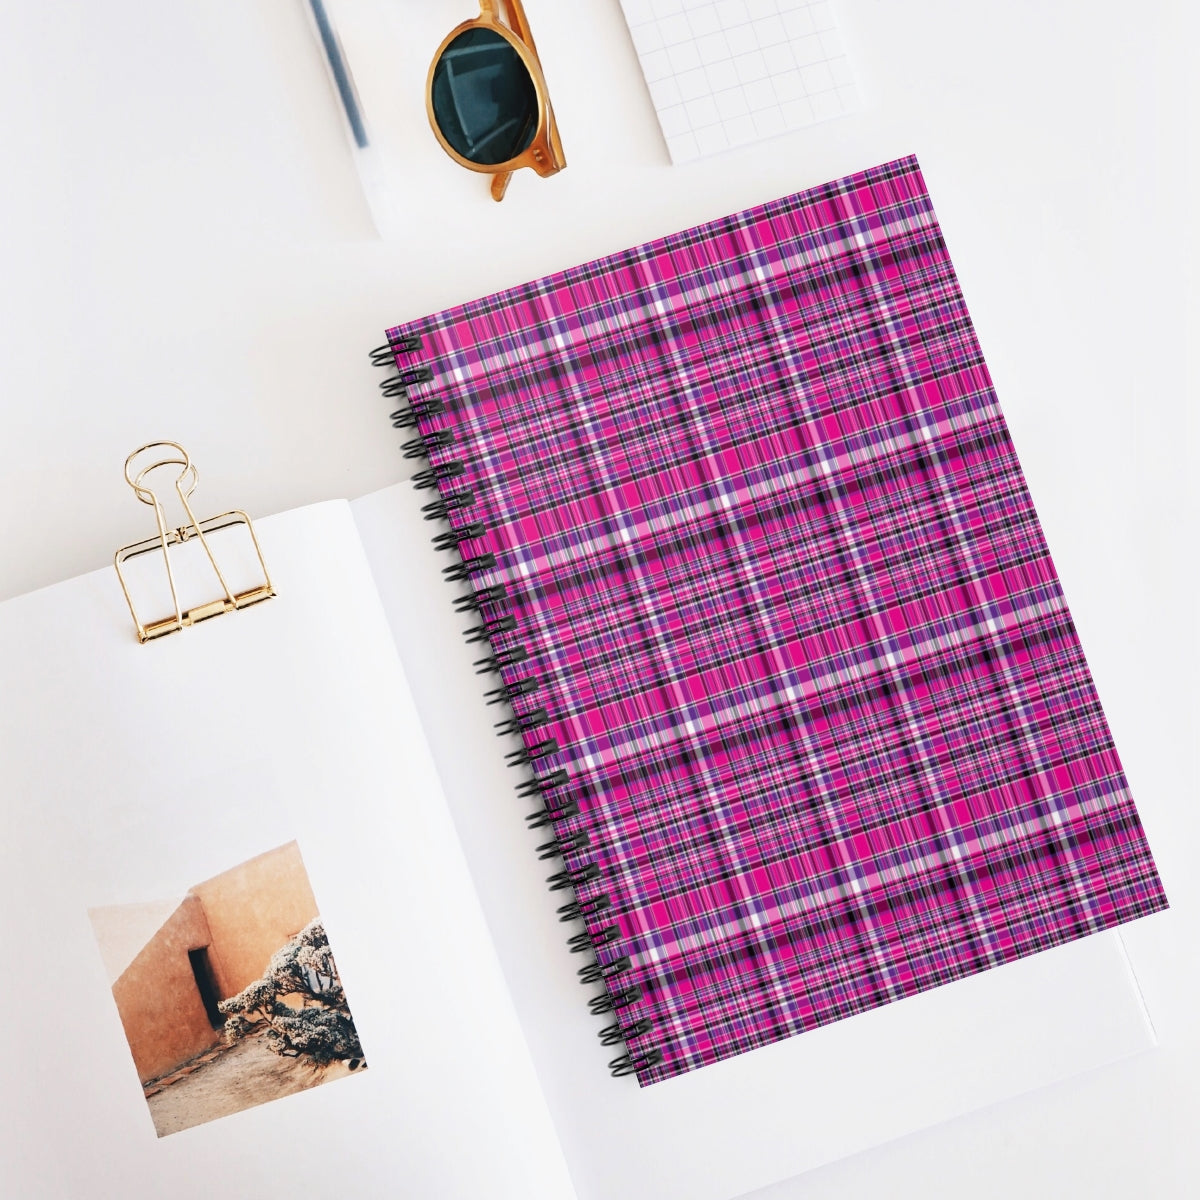 Pink and Purple Plaid Spiral Ruled Line Notebook